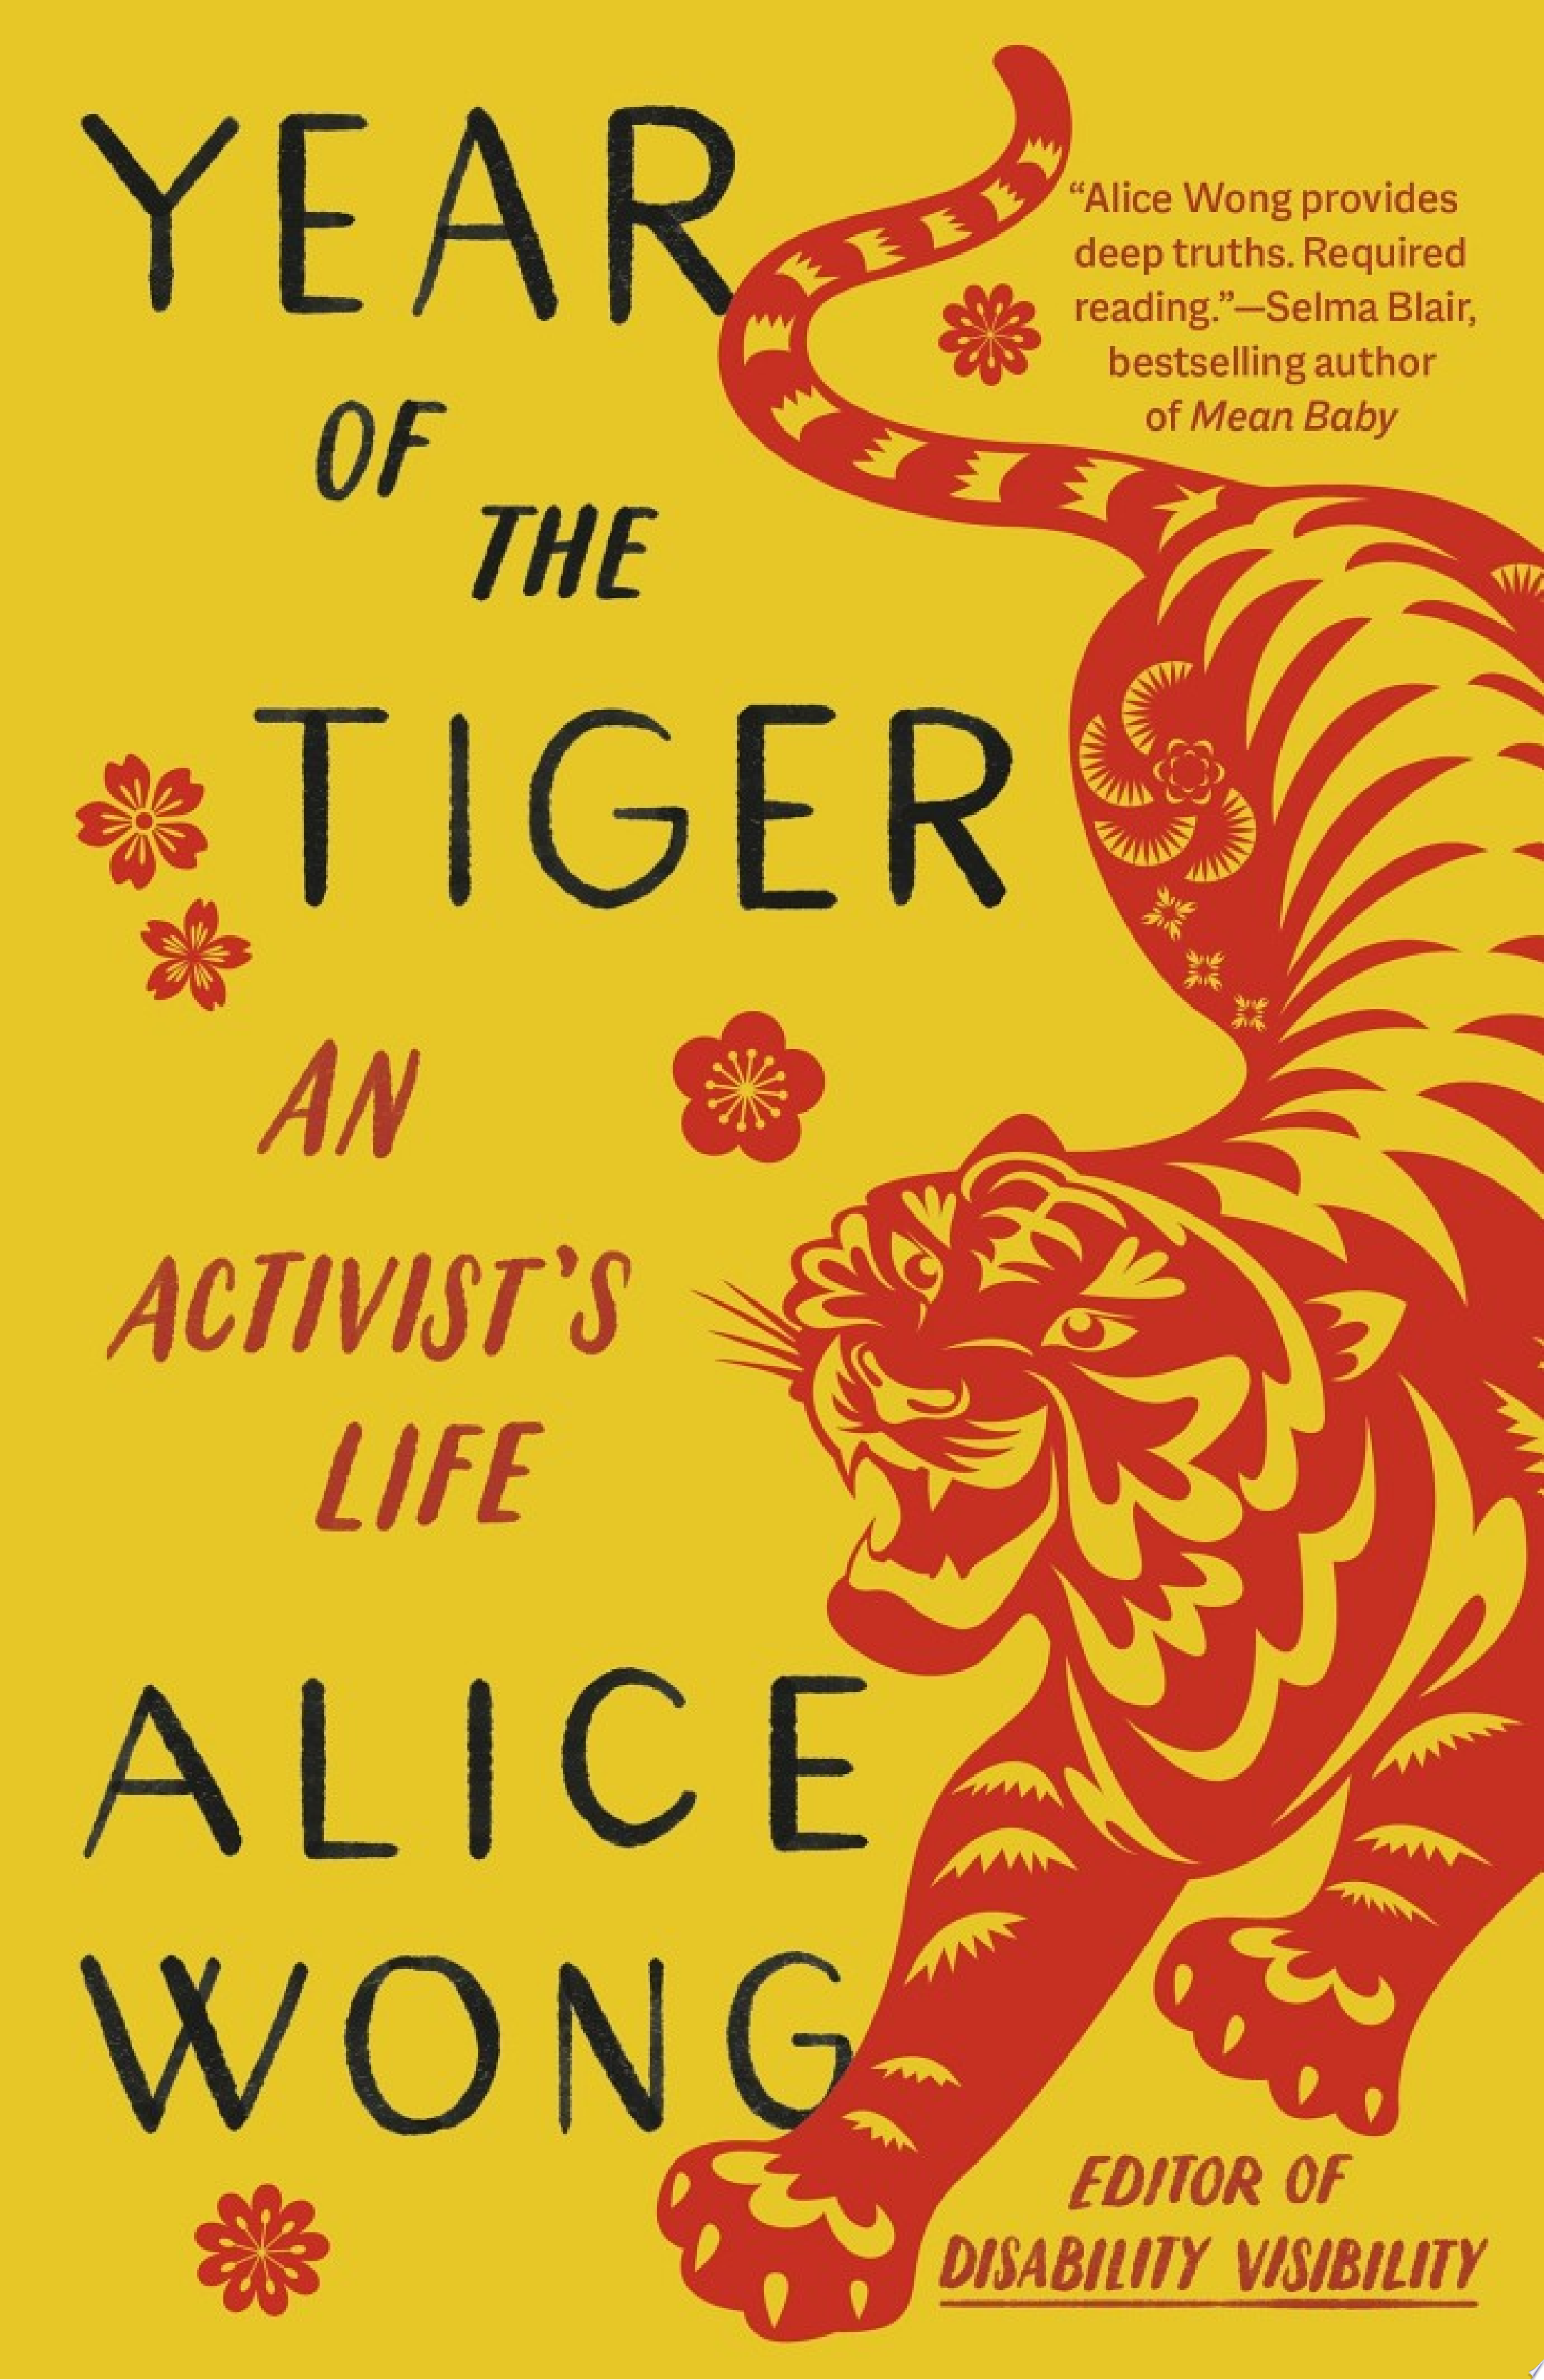 Text: Year of the tiger an activist's life by Alice Wong on a yellow background with a red tiger